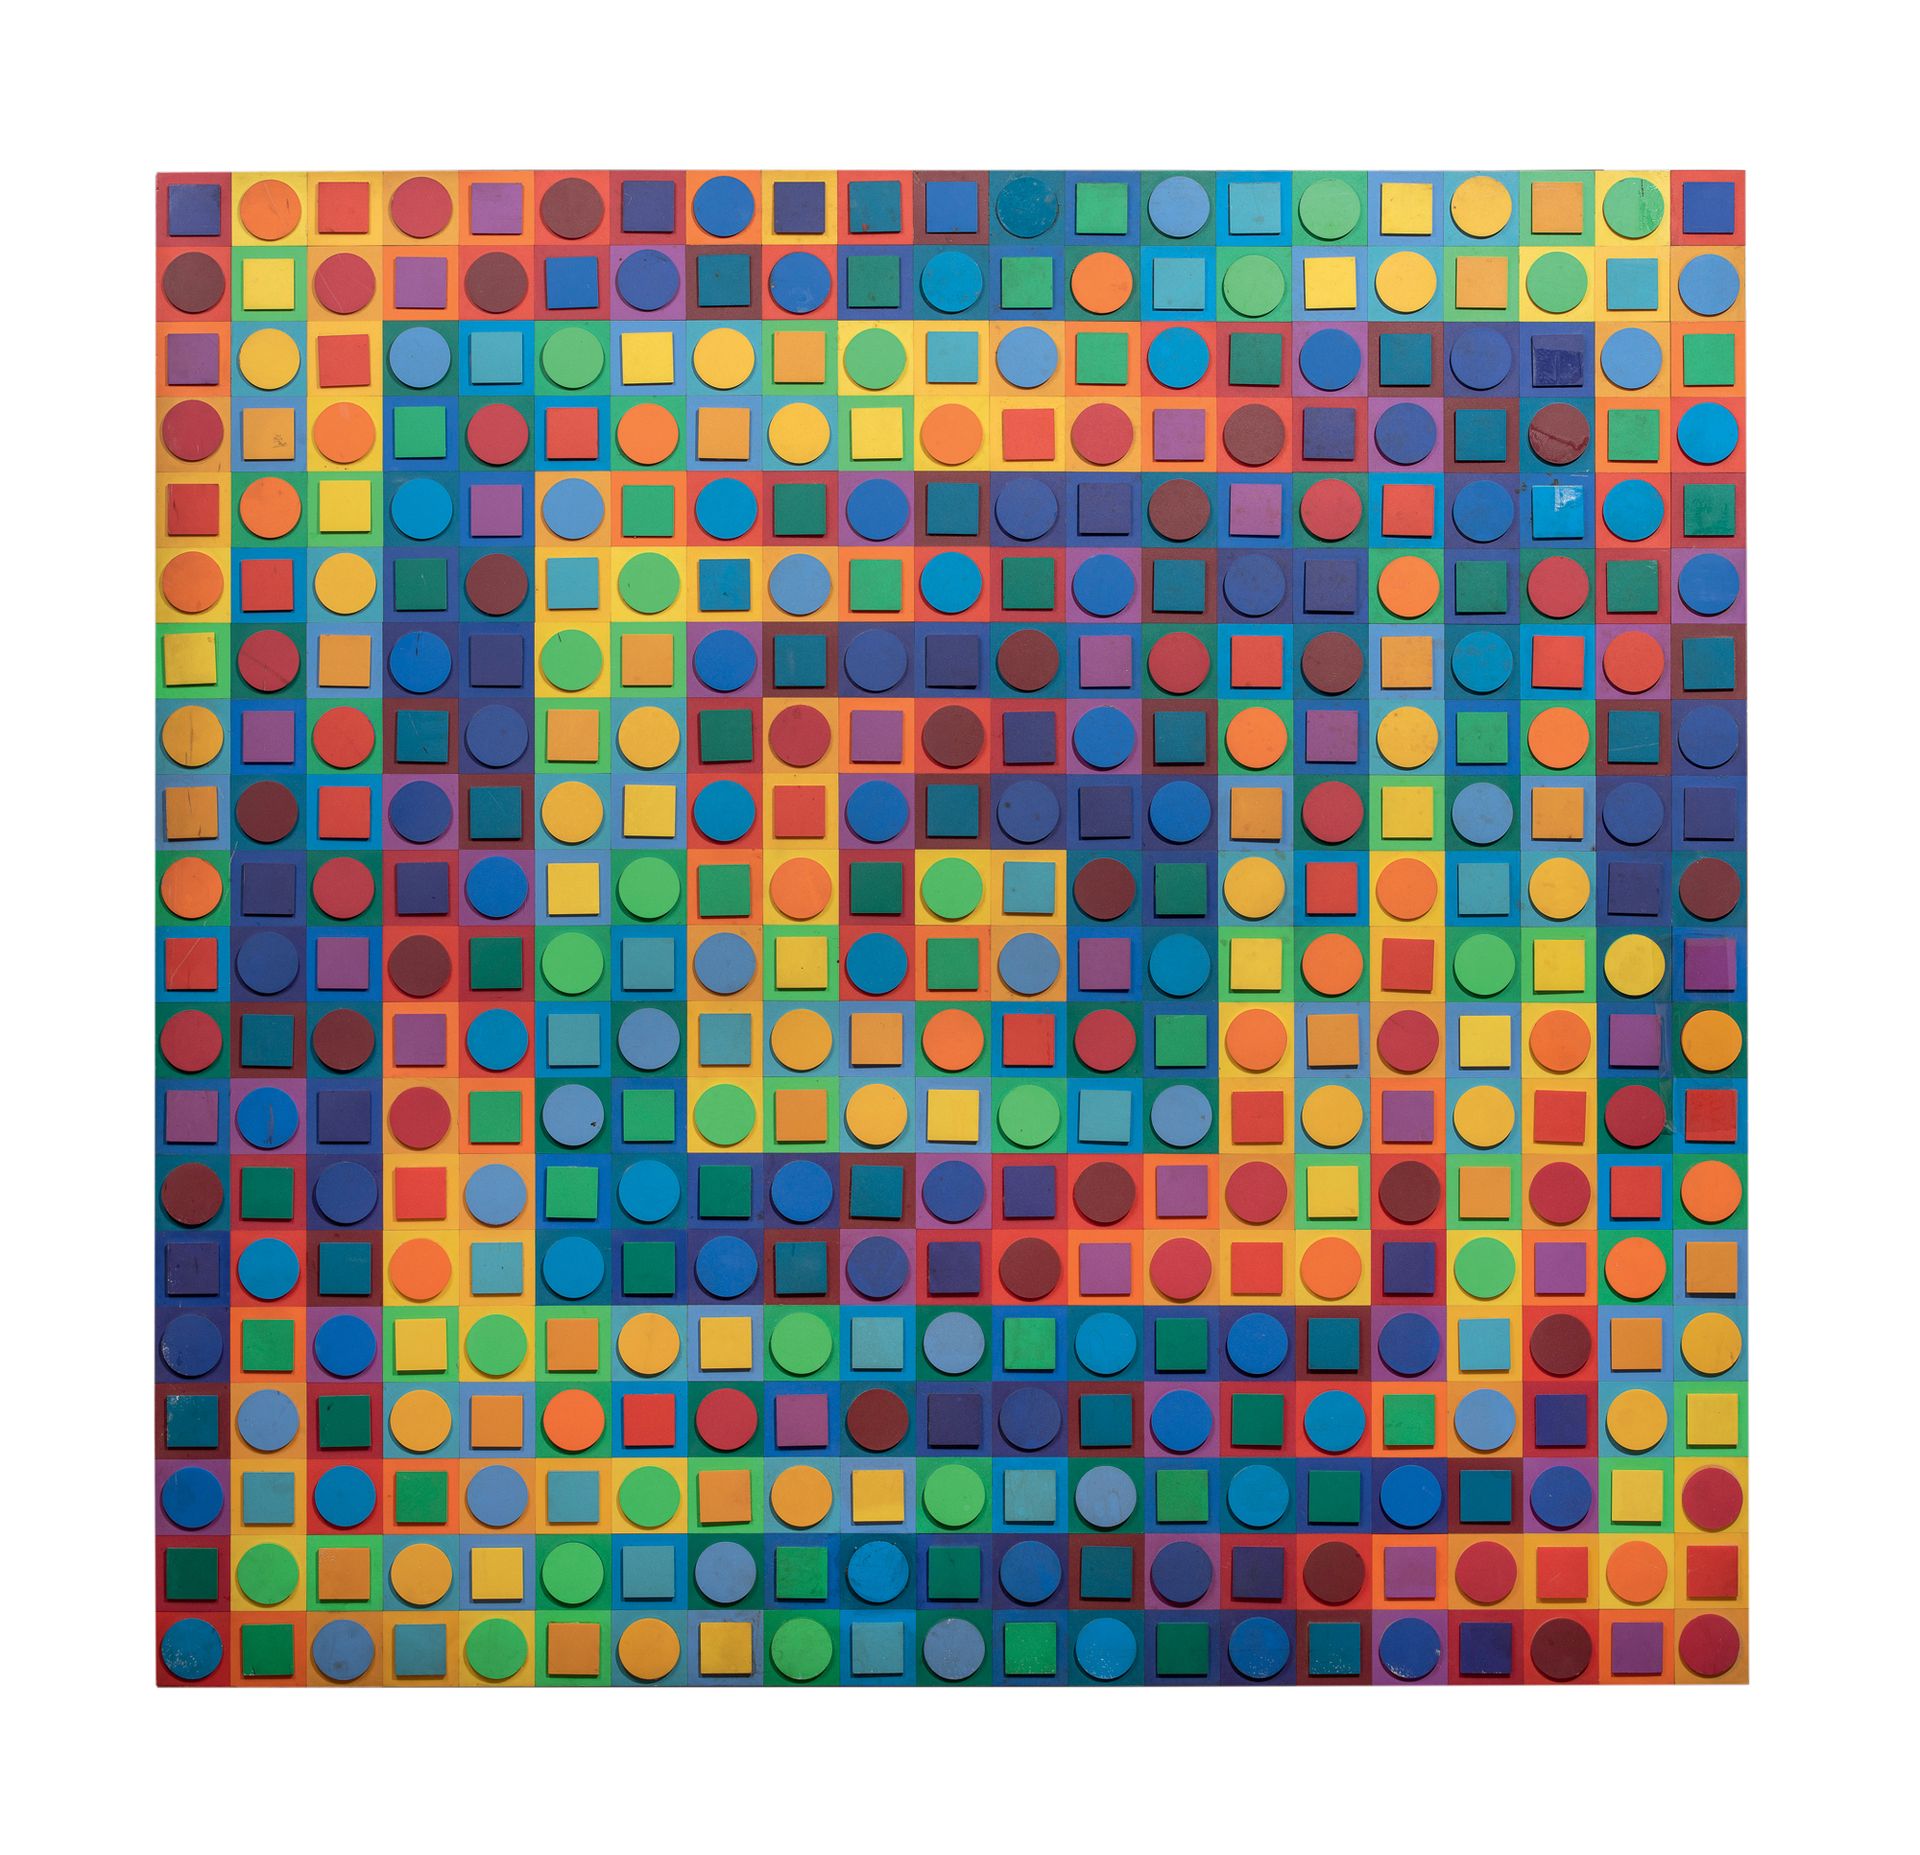 Victor VASARELY (1906-1997) 

Kanta ORION, prototype, c.1970
Collage of coloured&hellip;